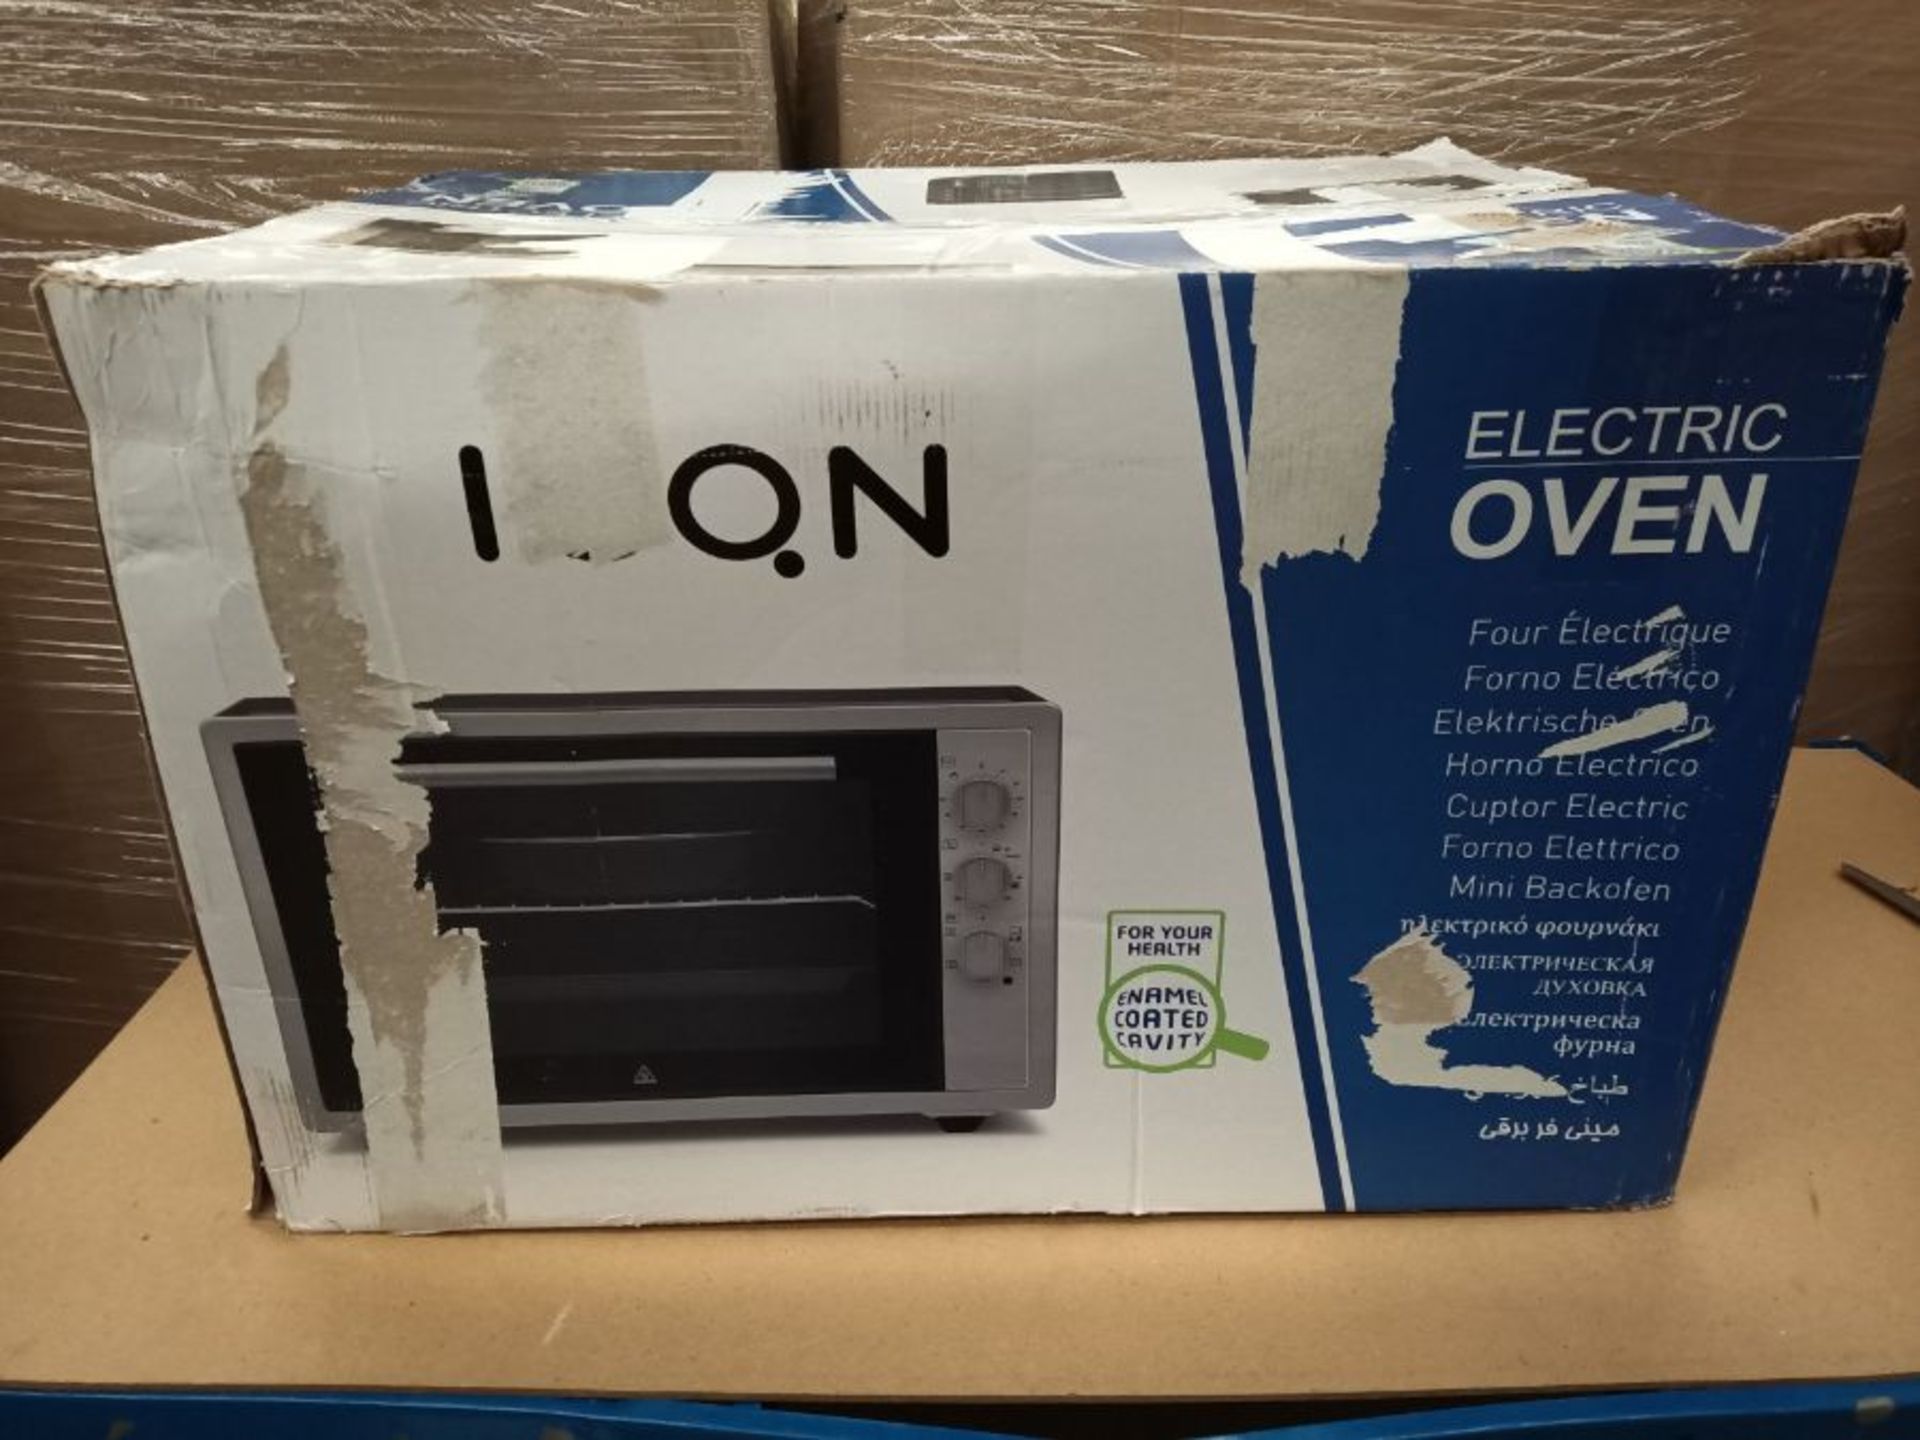 RRP £125.00 ICQN 60 liter XXL mini oven | 1800 W | Circulating air | Pizza oven | Double glazing | - Image 2 of 3